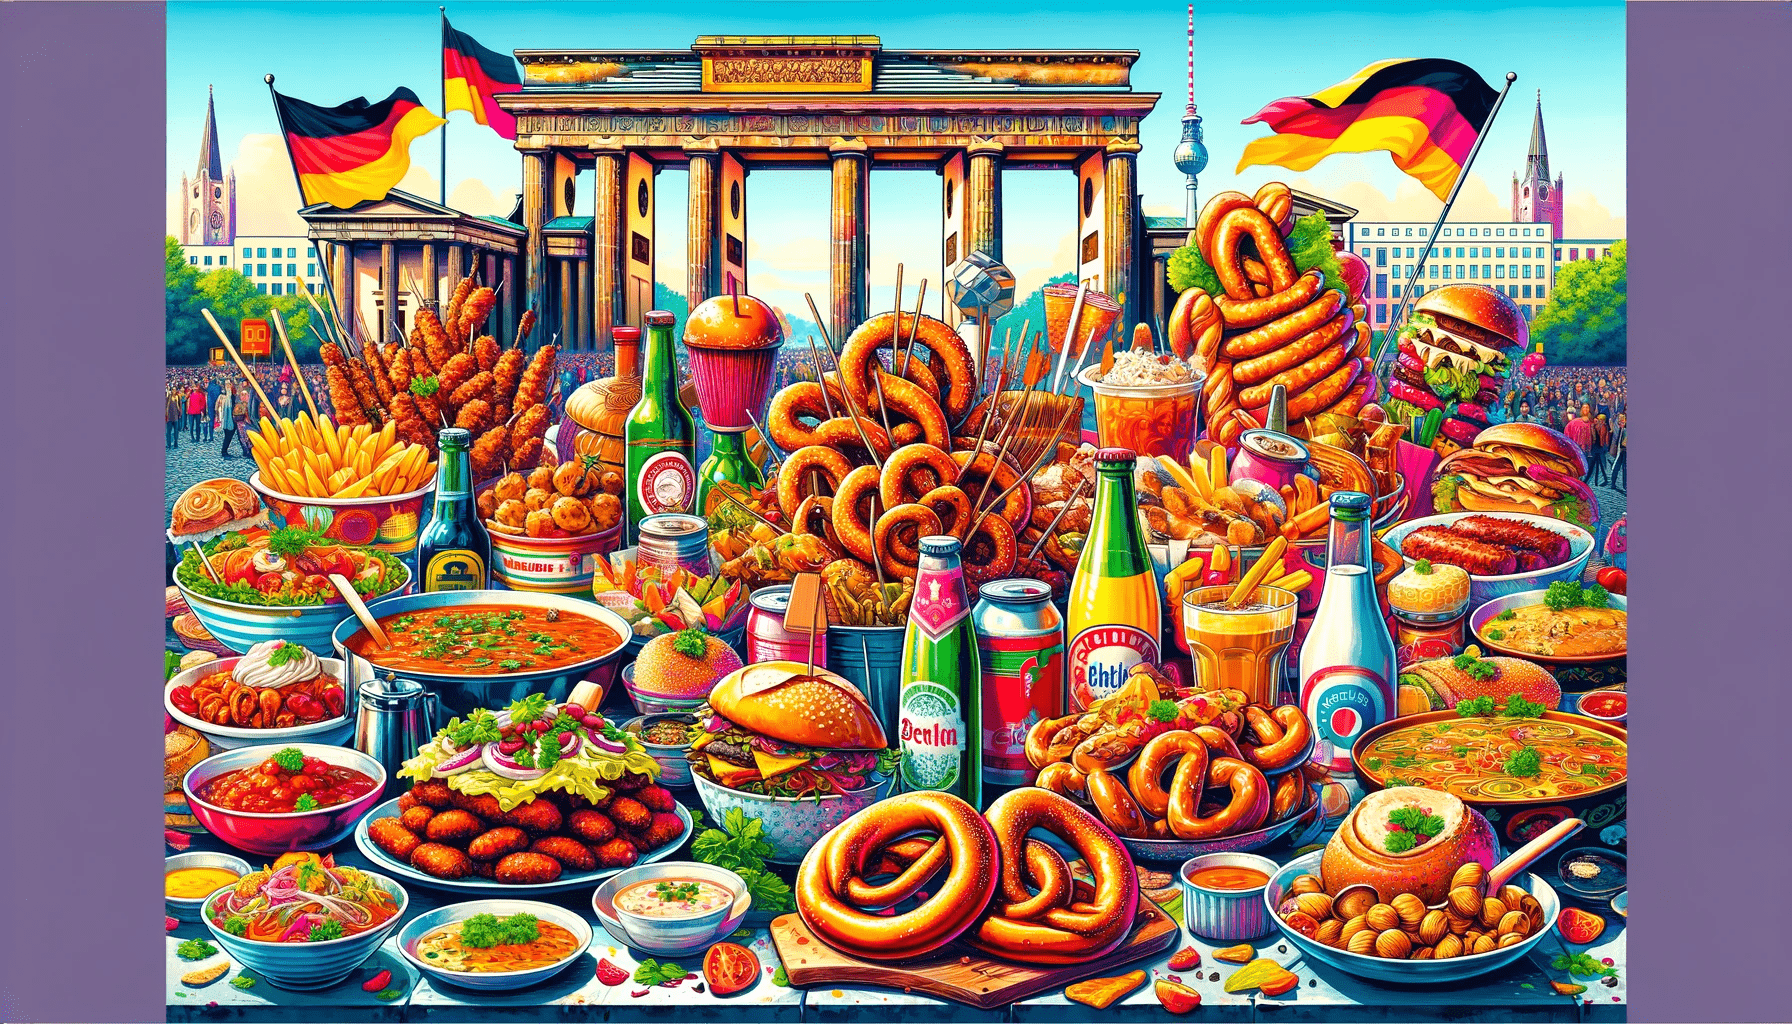 A painting of an appetizing scene of food displayed in front of the Berlin Brandenburg Gate.